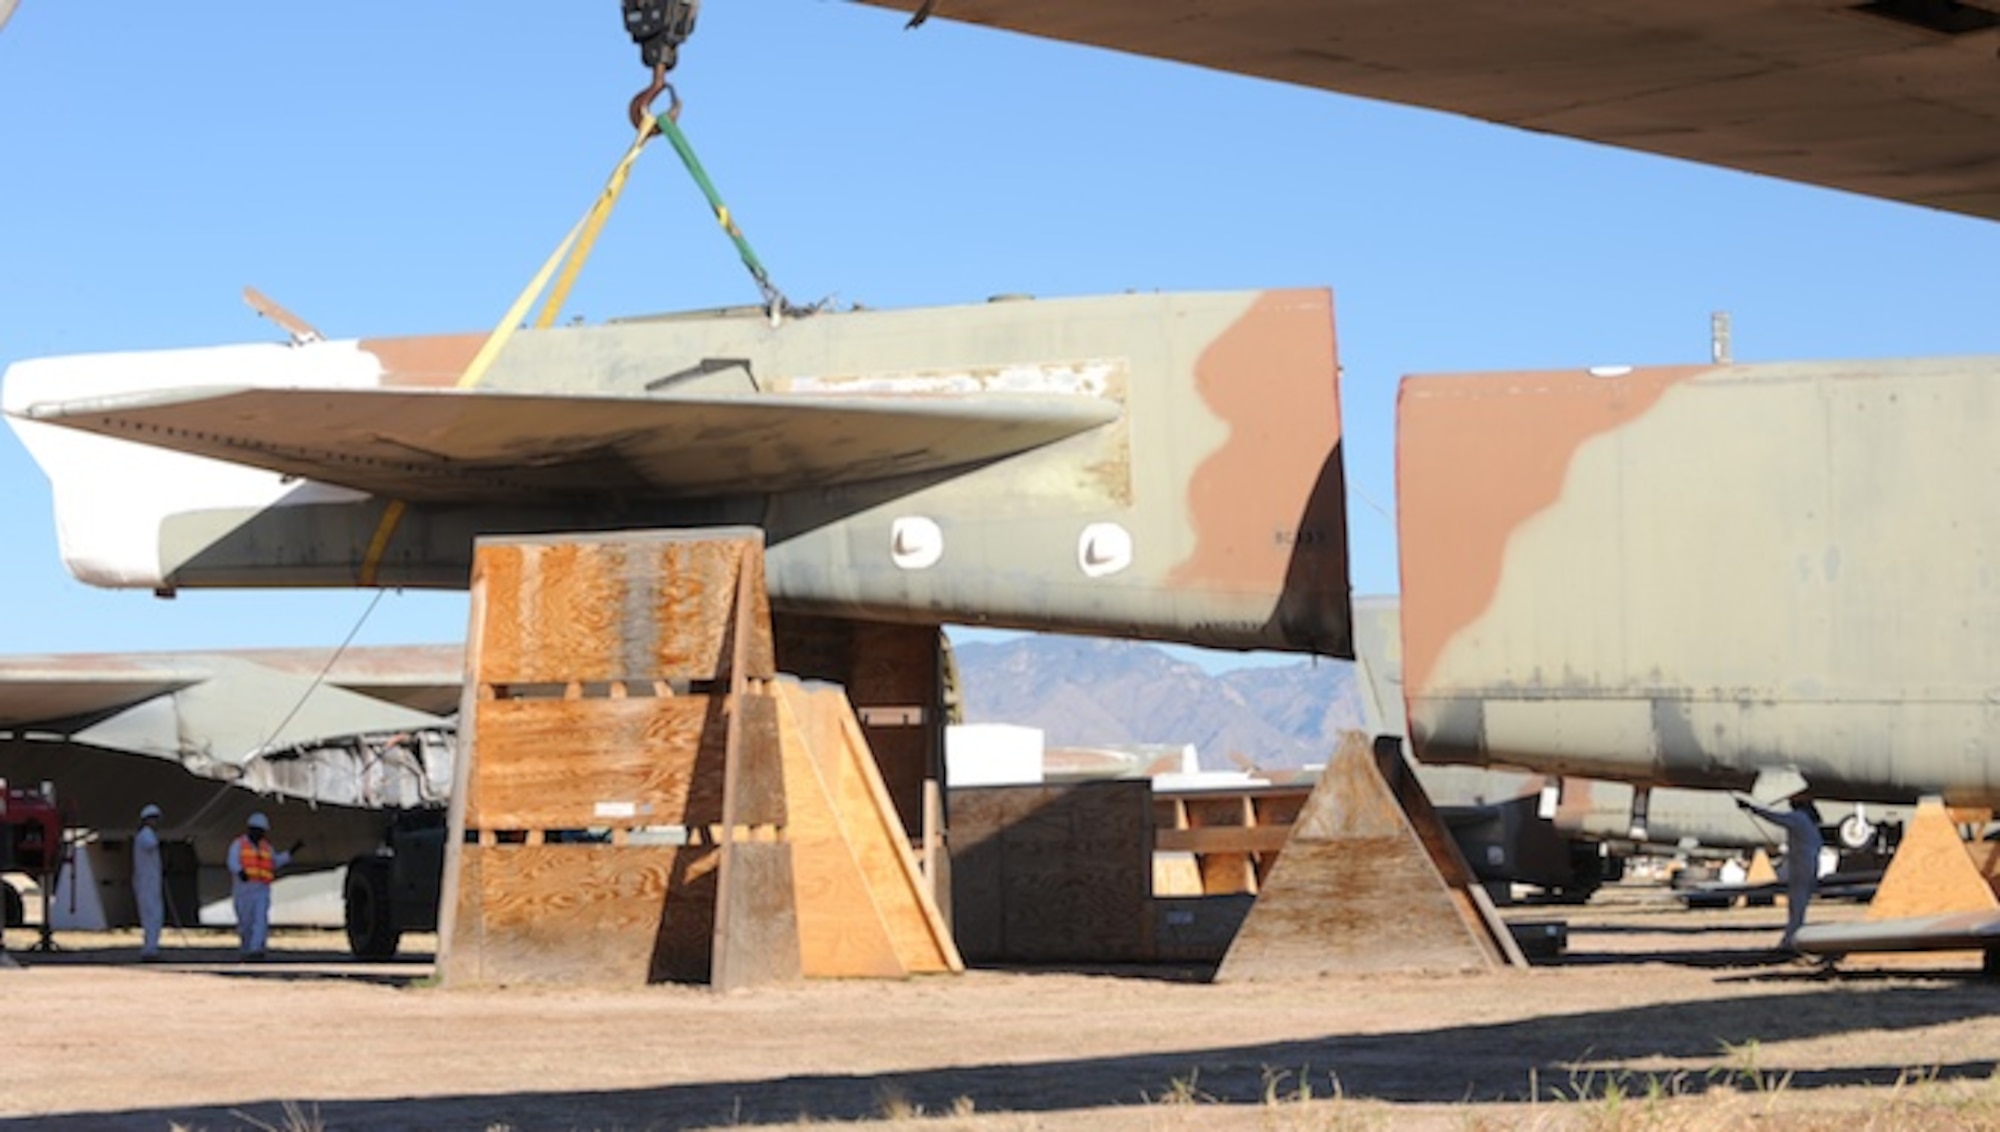 Personnel with the 578th Storage and Disposal Squadron lift a B-52G's tail section onto a custom-made cradle Dec, 19, 2013, at the 309th Aerospace Maintenance and Regeneration Group, Davis-Monthan Air Force Base, Ariz. The cradle is purposely placed 30 degrees off center and a minimum of six feet apart from the aircraft's fuselage in order for Russia's satellites to verify the elimination. (U.S Air Force photo/Staff Sgt. Angela Ruiz)